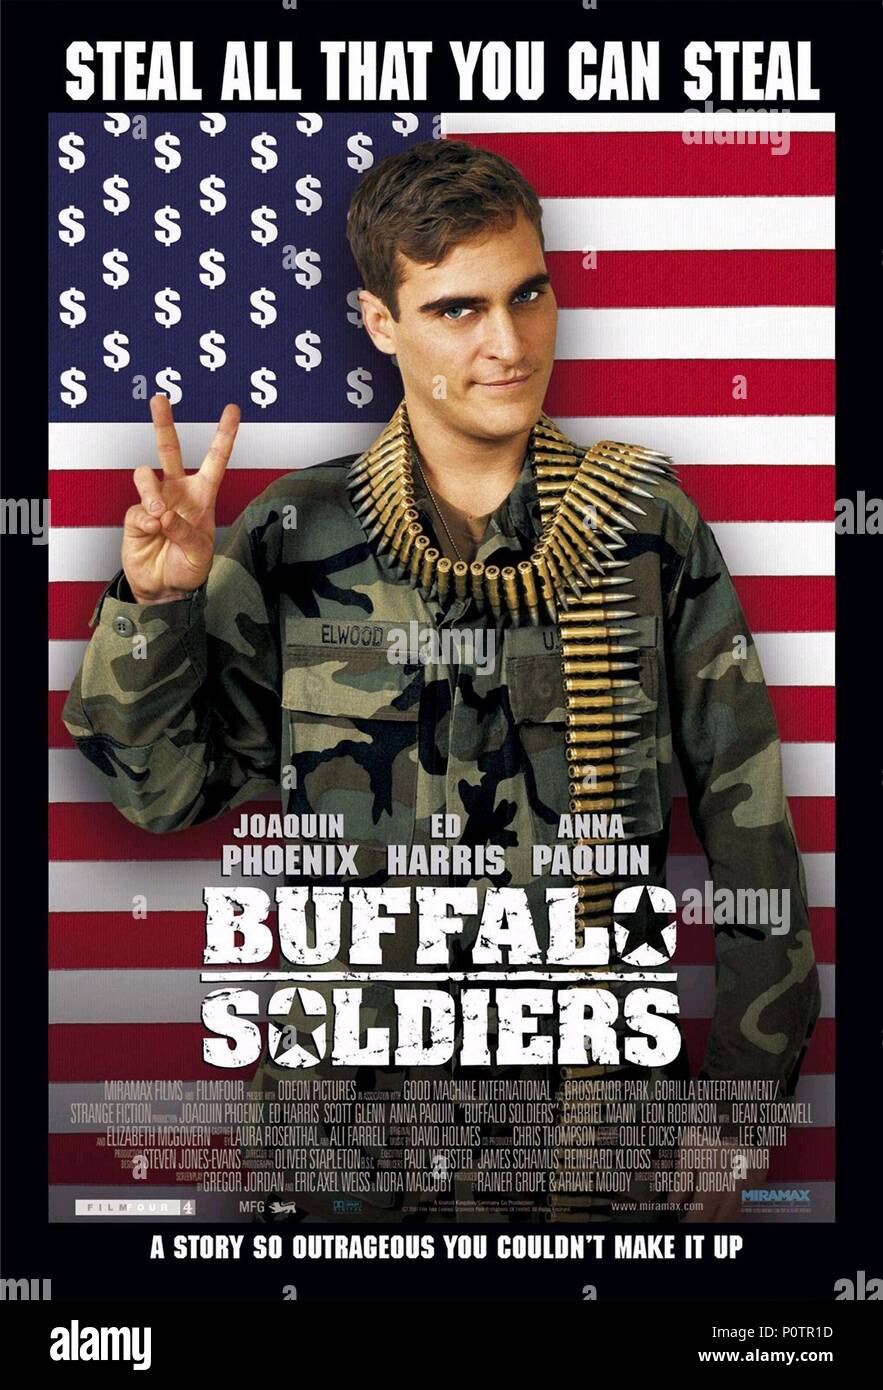 Uregelmæssigheder kranium Officer Original Film Title: BUFFALO SOLDIERS. English Title: BUFFALO SOLDIERS. Film  Director: GREGOR JORDAN. Year: 2001. Copyright: Editorial inside use only.  This is a publicly distributed handout. Access rights only, no license of